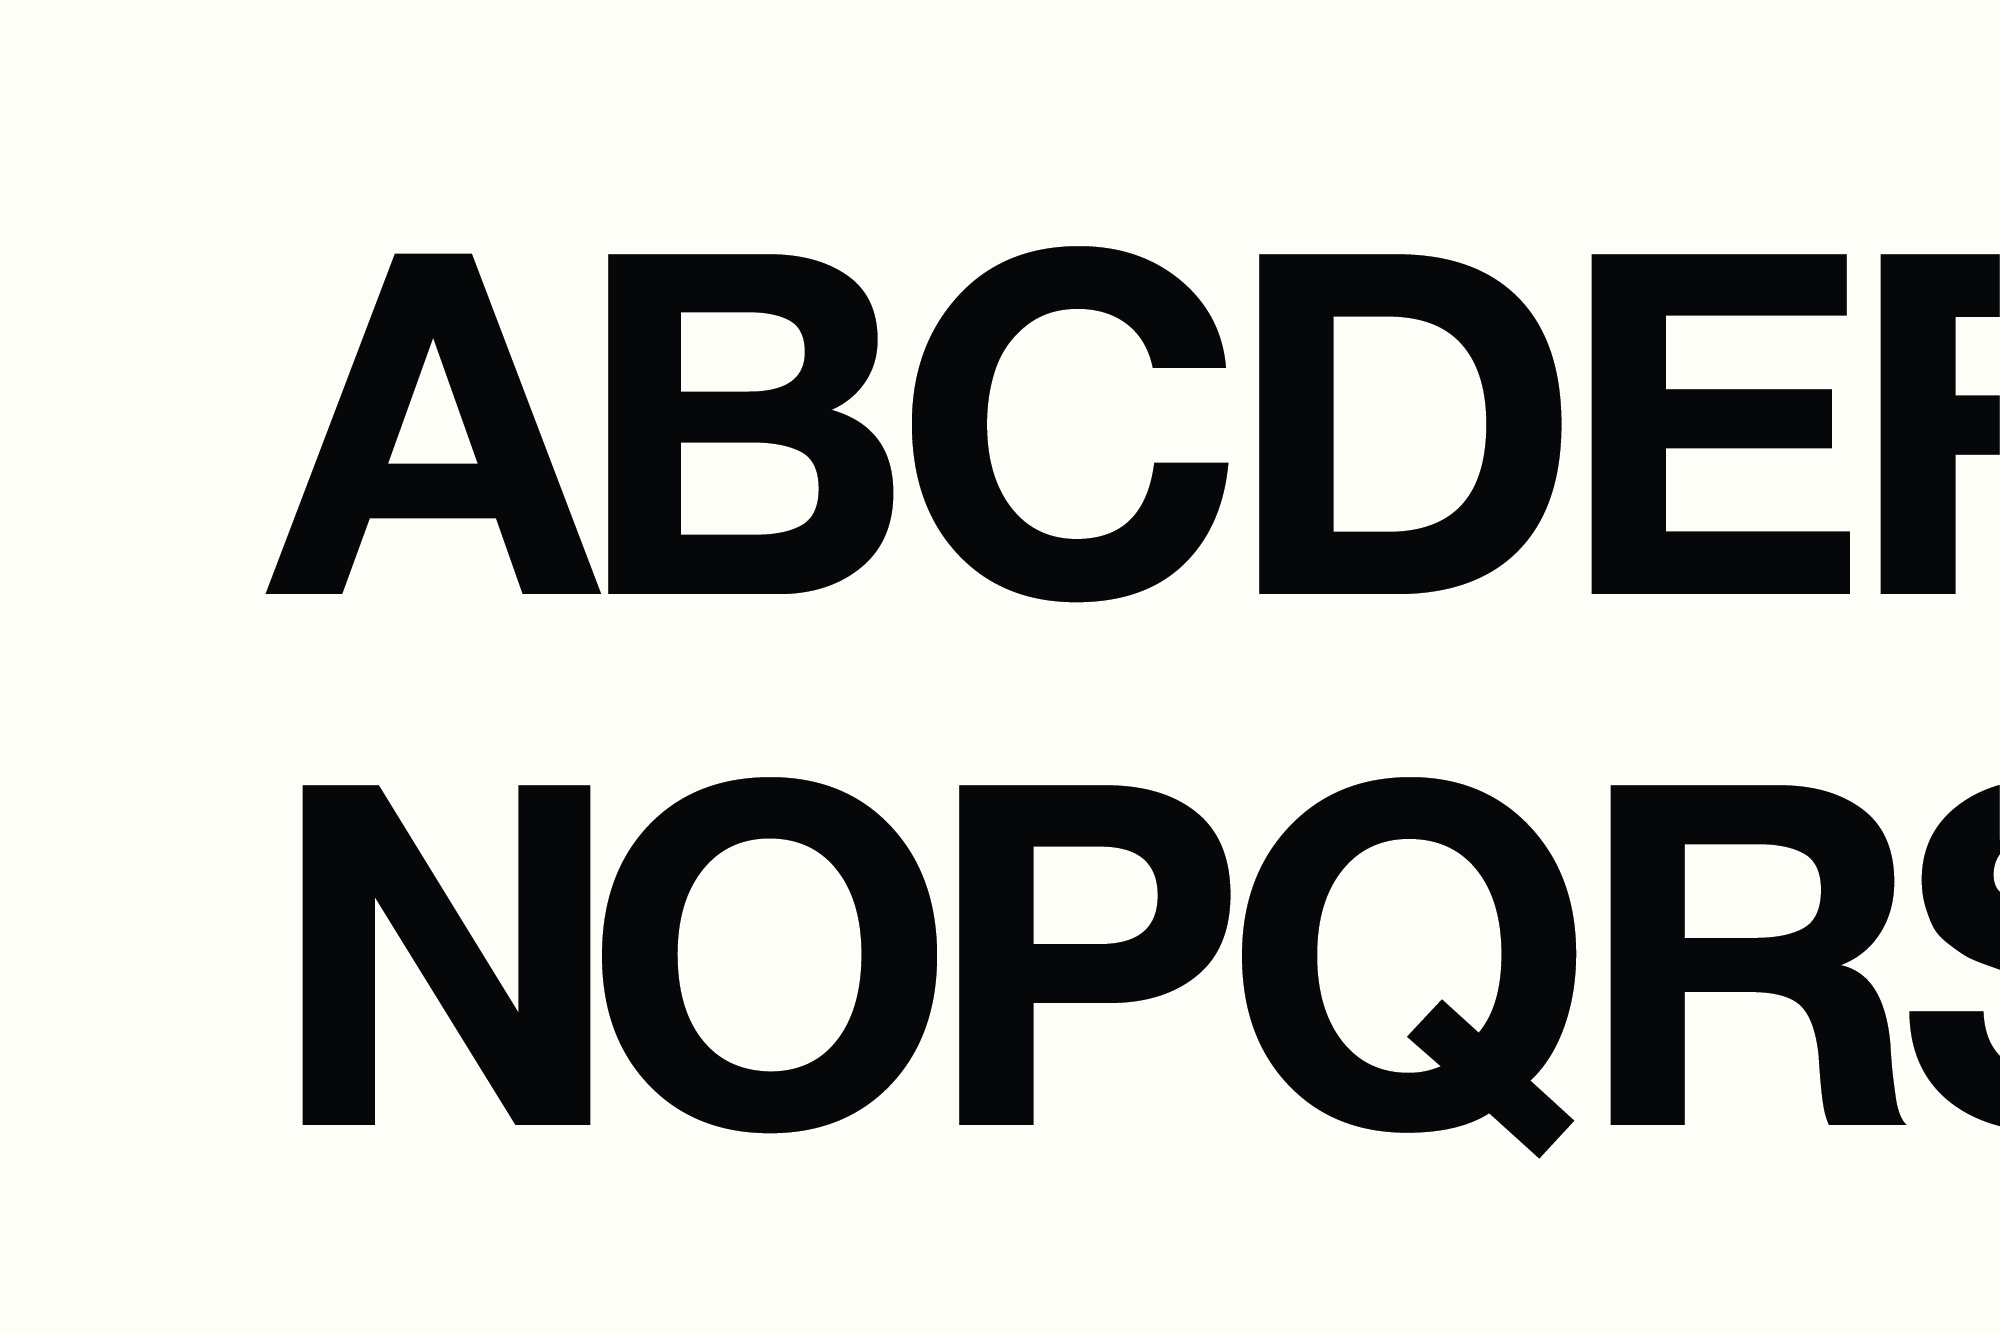 official typeface macaque 2artboard 1